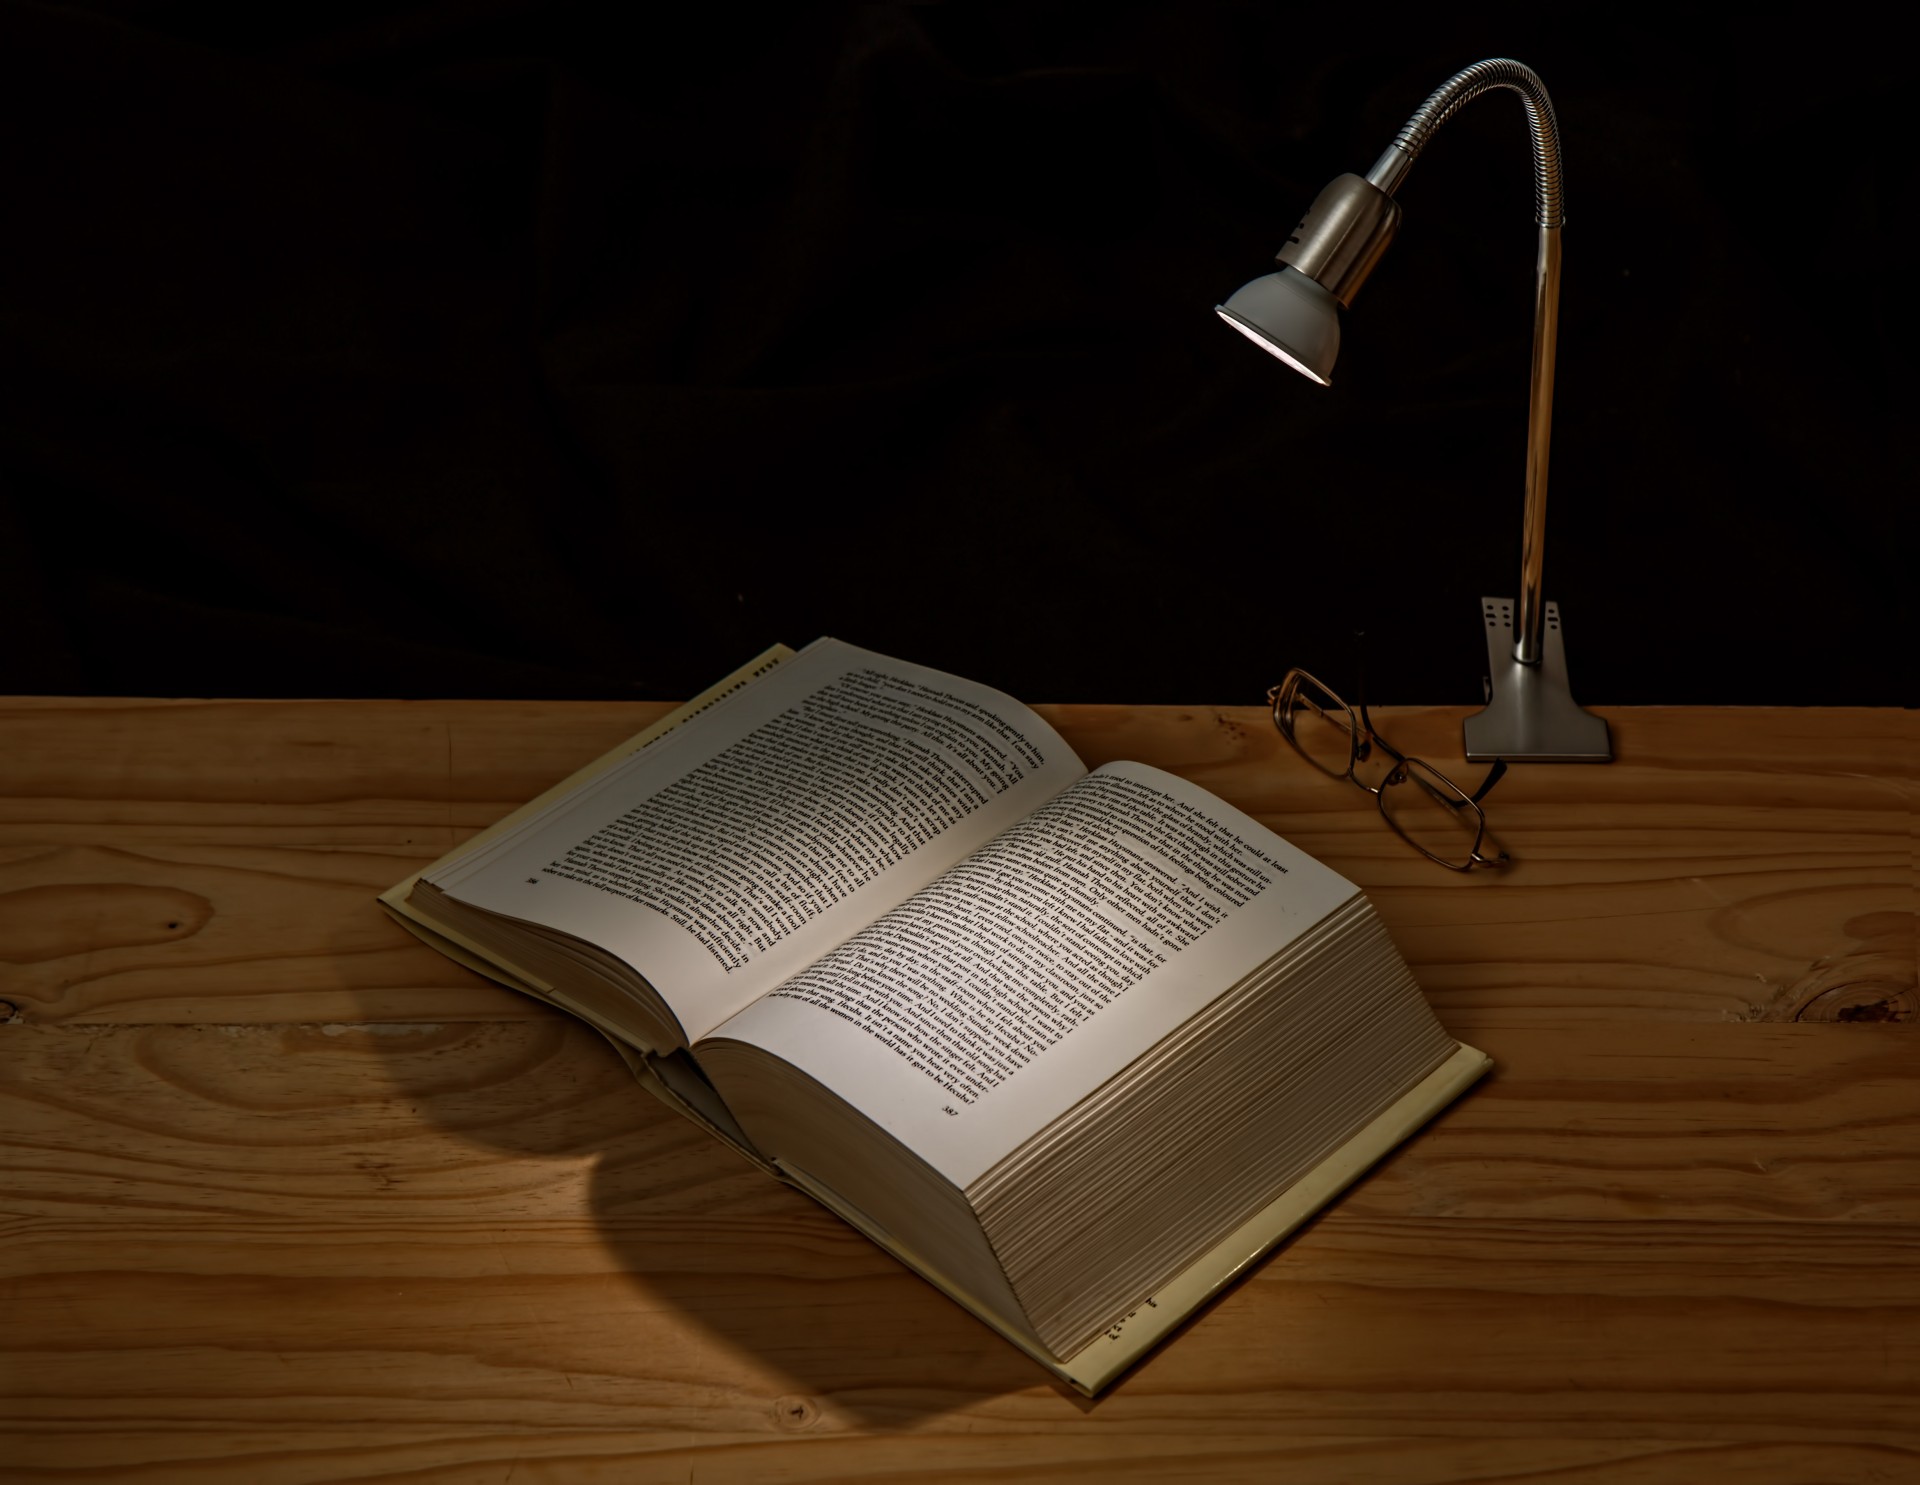 Book on desk lit by lamp